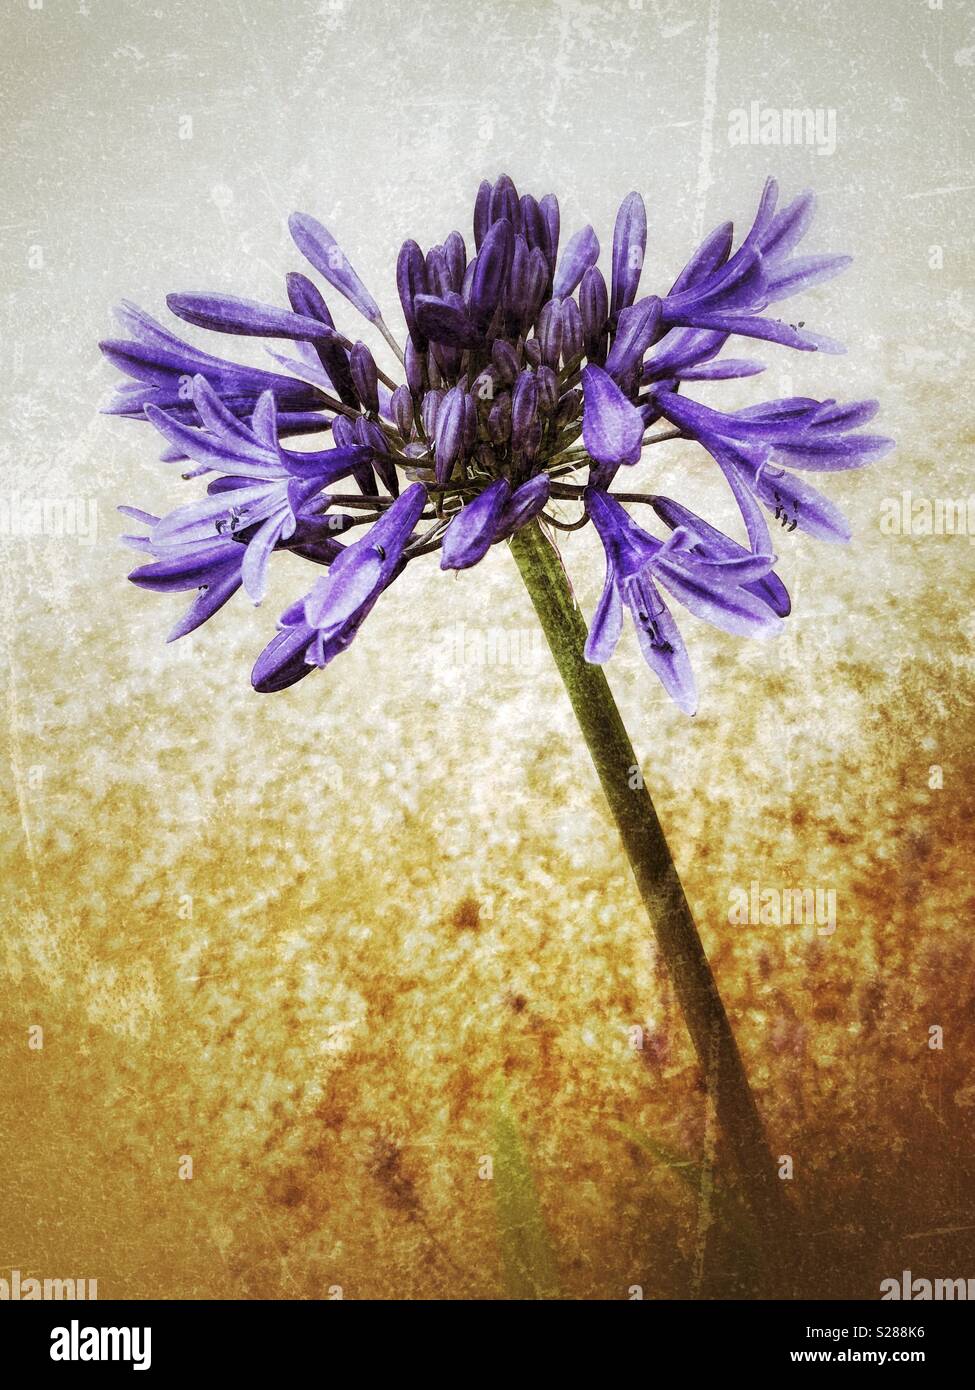 Single stem of blue Agapanthus, or African lily against a sandy grunge background Stock Photo